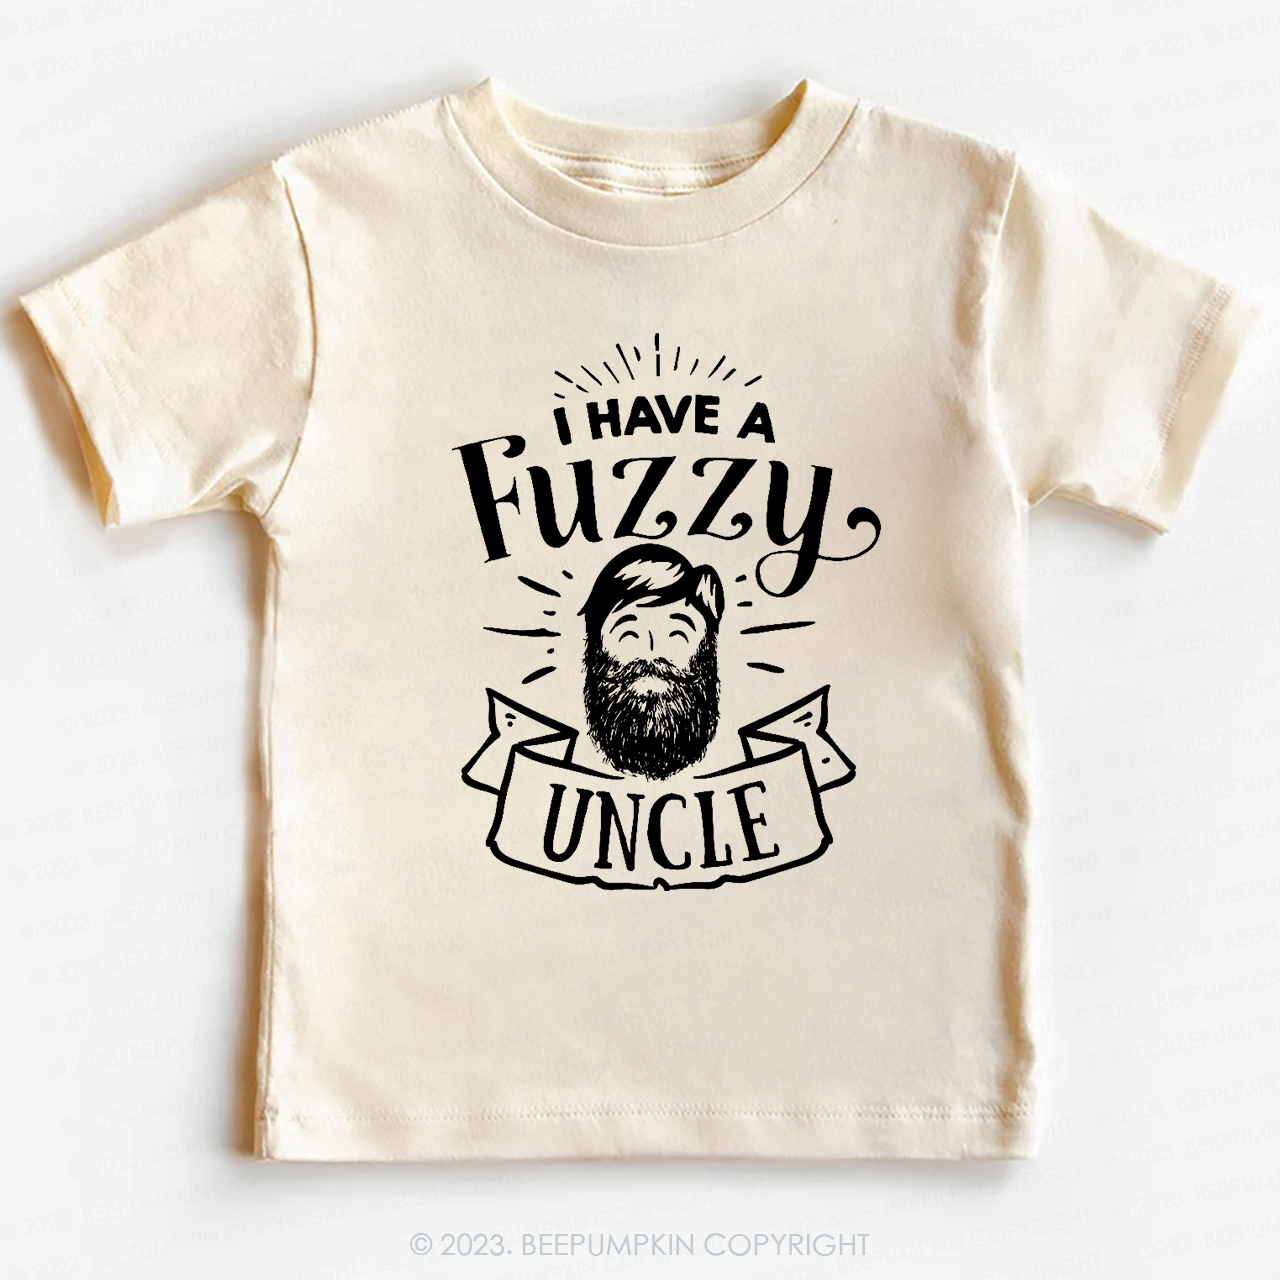  I Have a Fuzzy Uncle -Toddler Tees